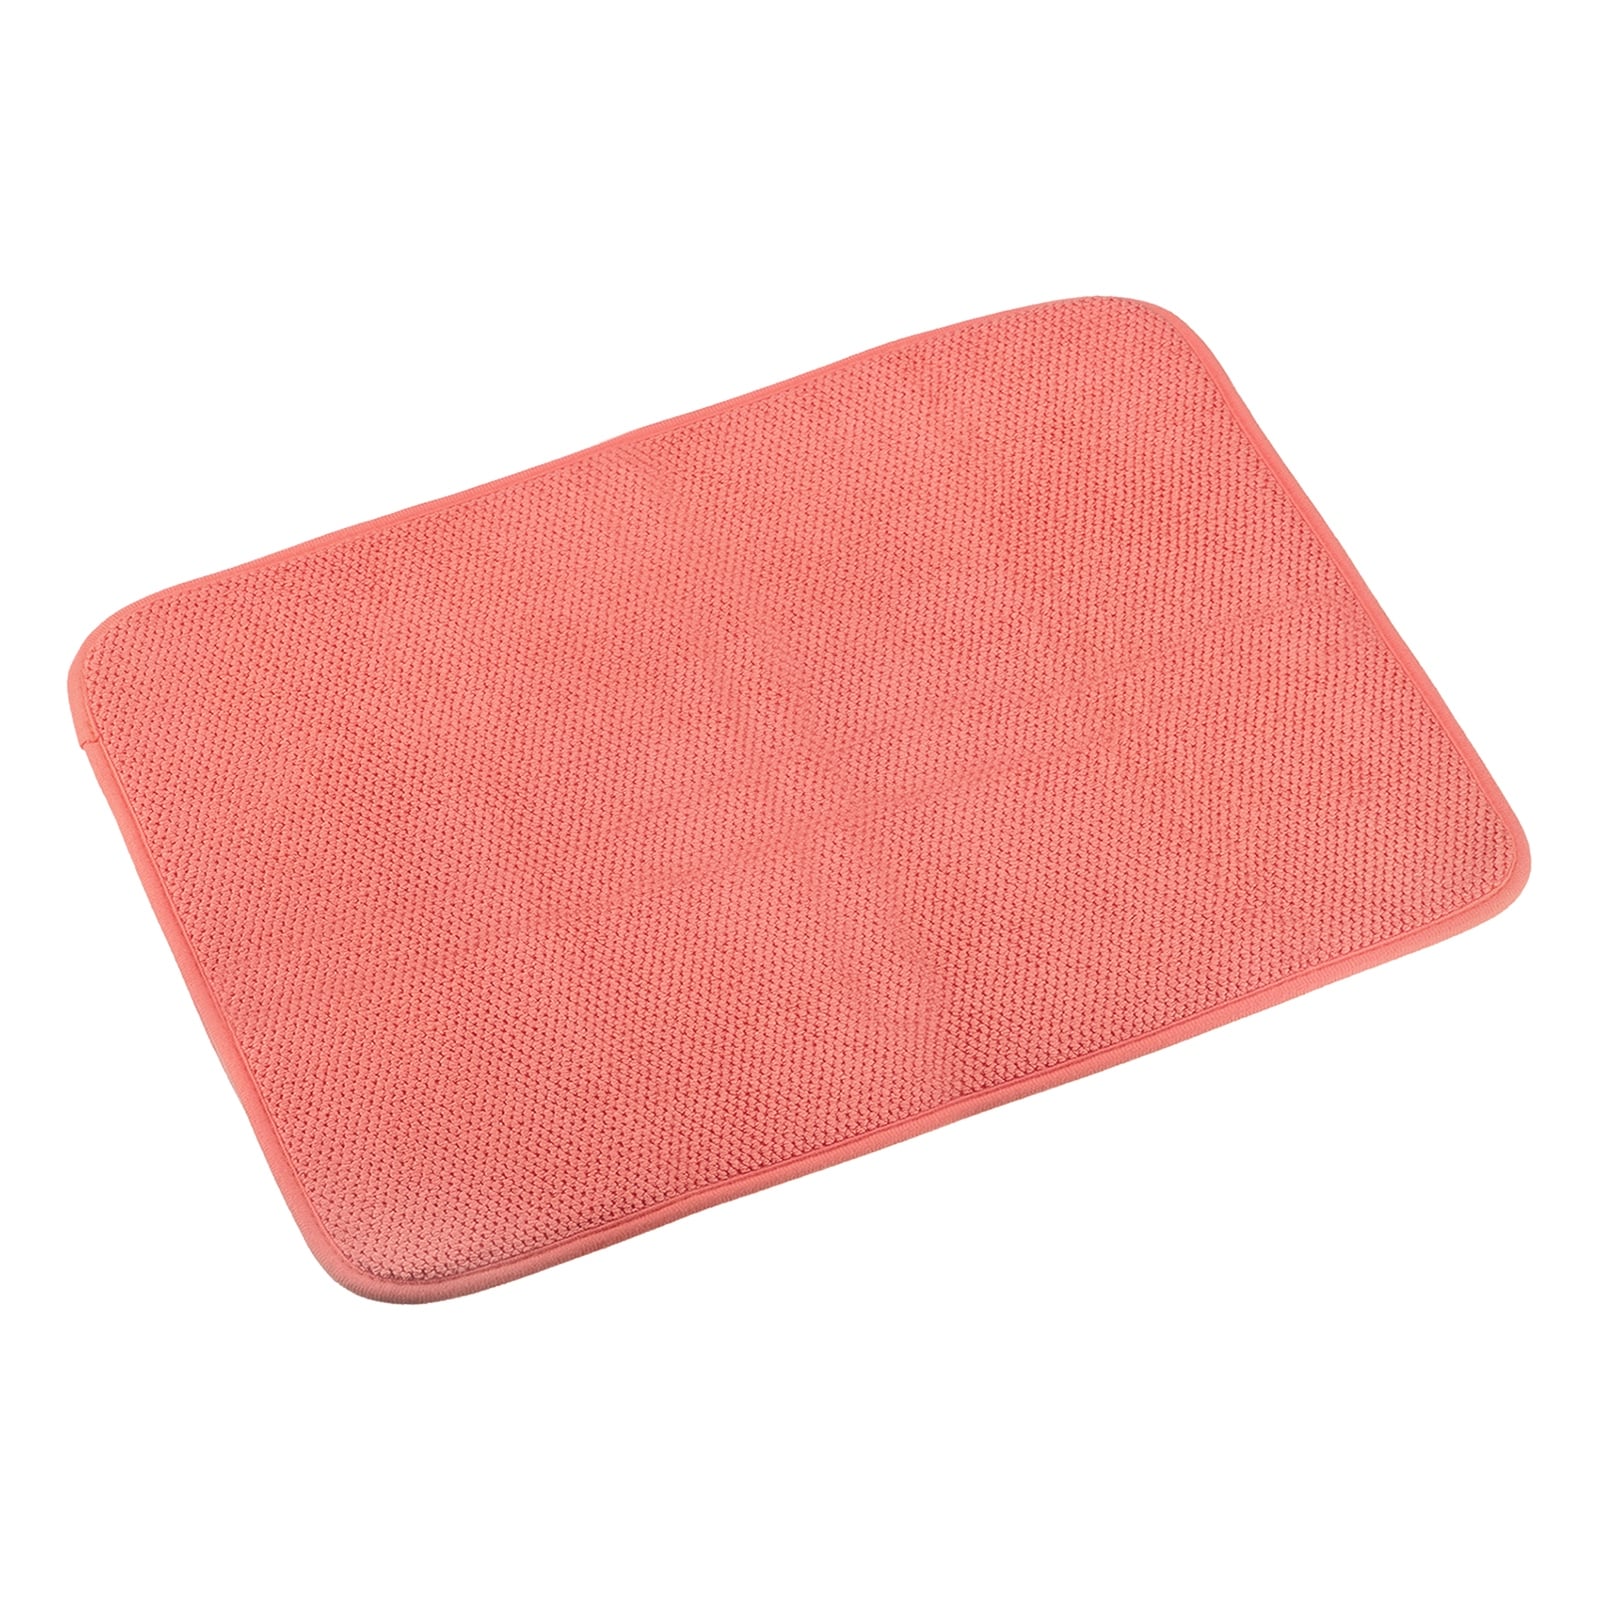 https://ak1.ostkcdn.com/images/products/is/images/direct/e01e8a6af70b8ab39ee1573b88a57b71960e8f10/3pcs-Microfibre-Dish-Drying-Mat-Kitchen-Absorbent-Dish-Drainer-Mat-Red.jpg